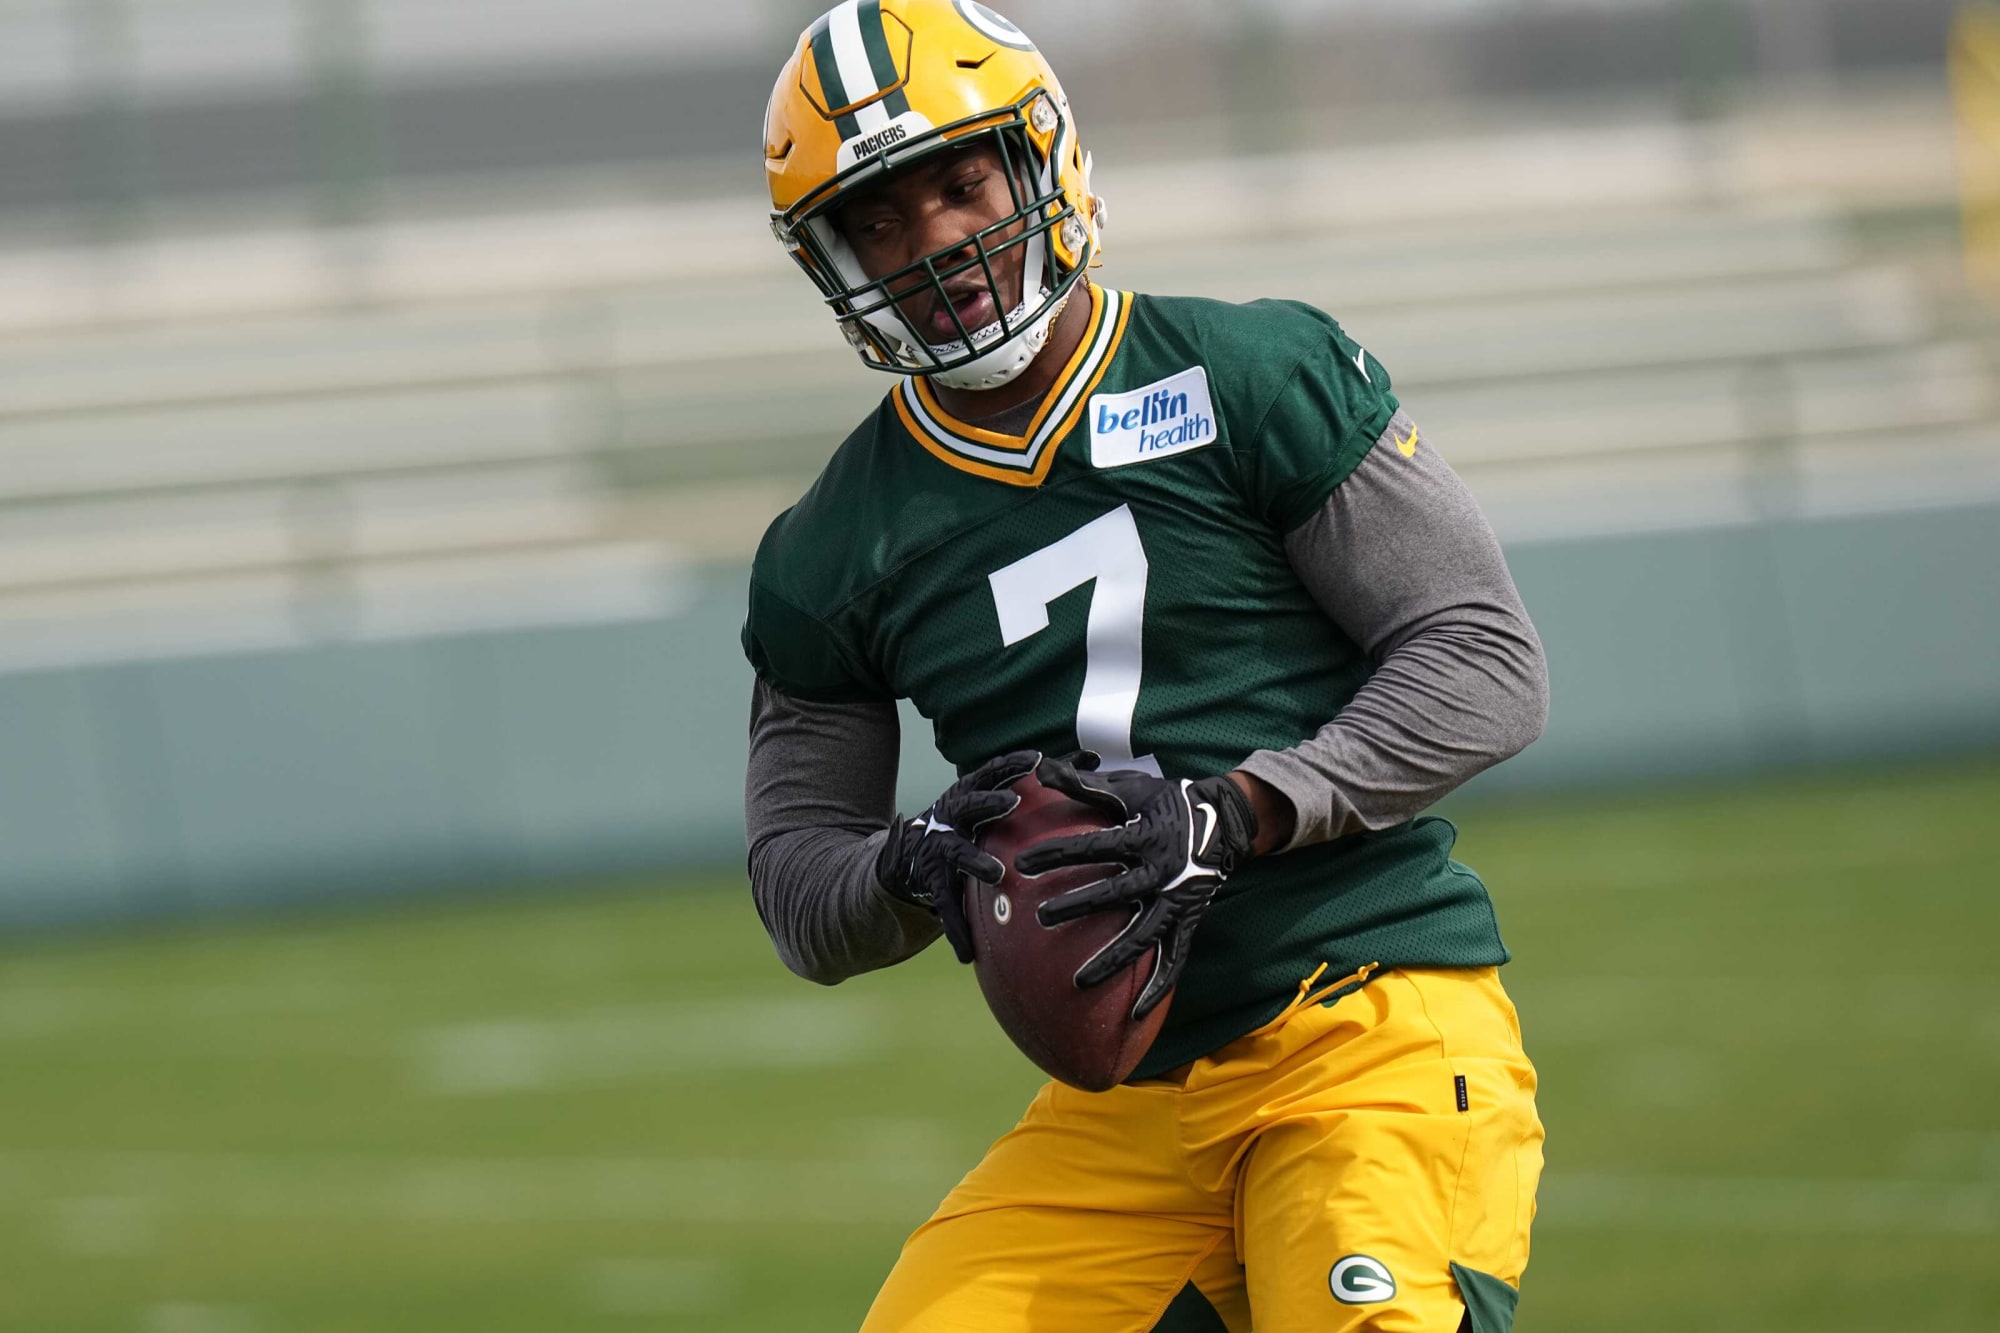 How many new starters will Packers have in the 2022 season?